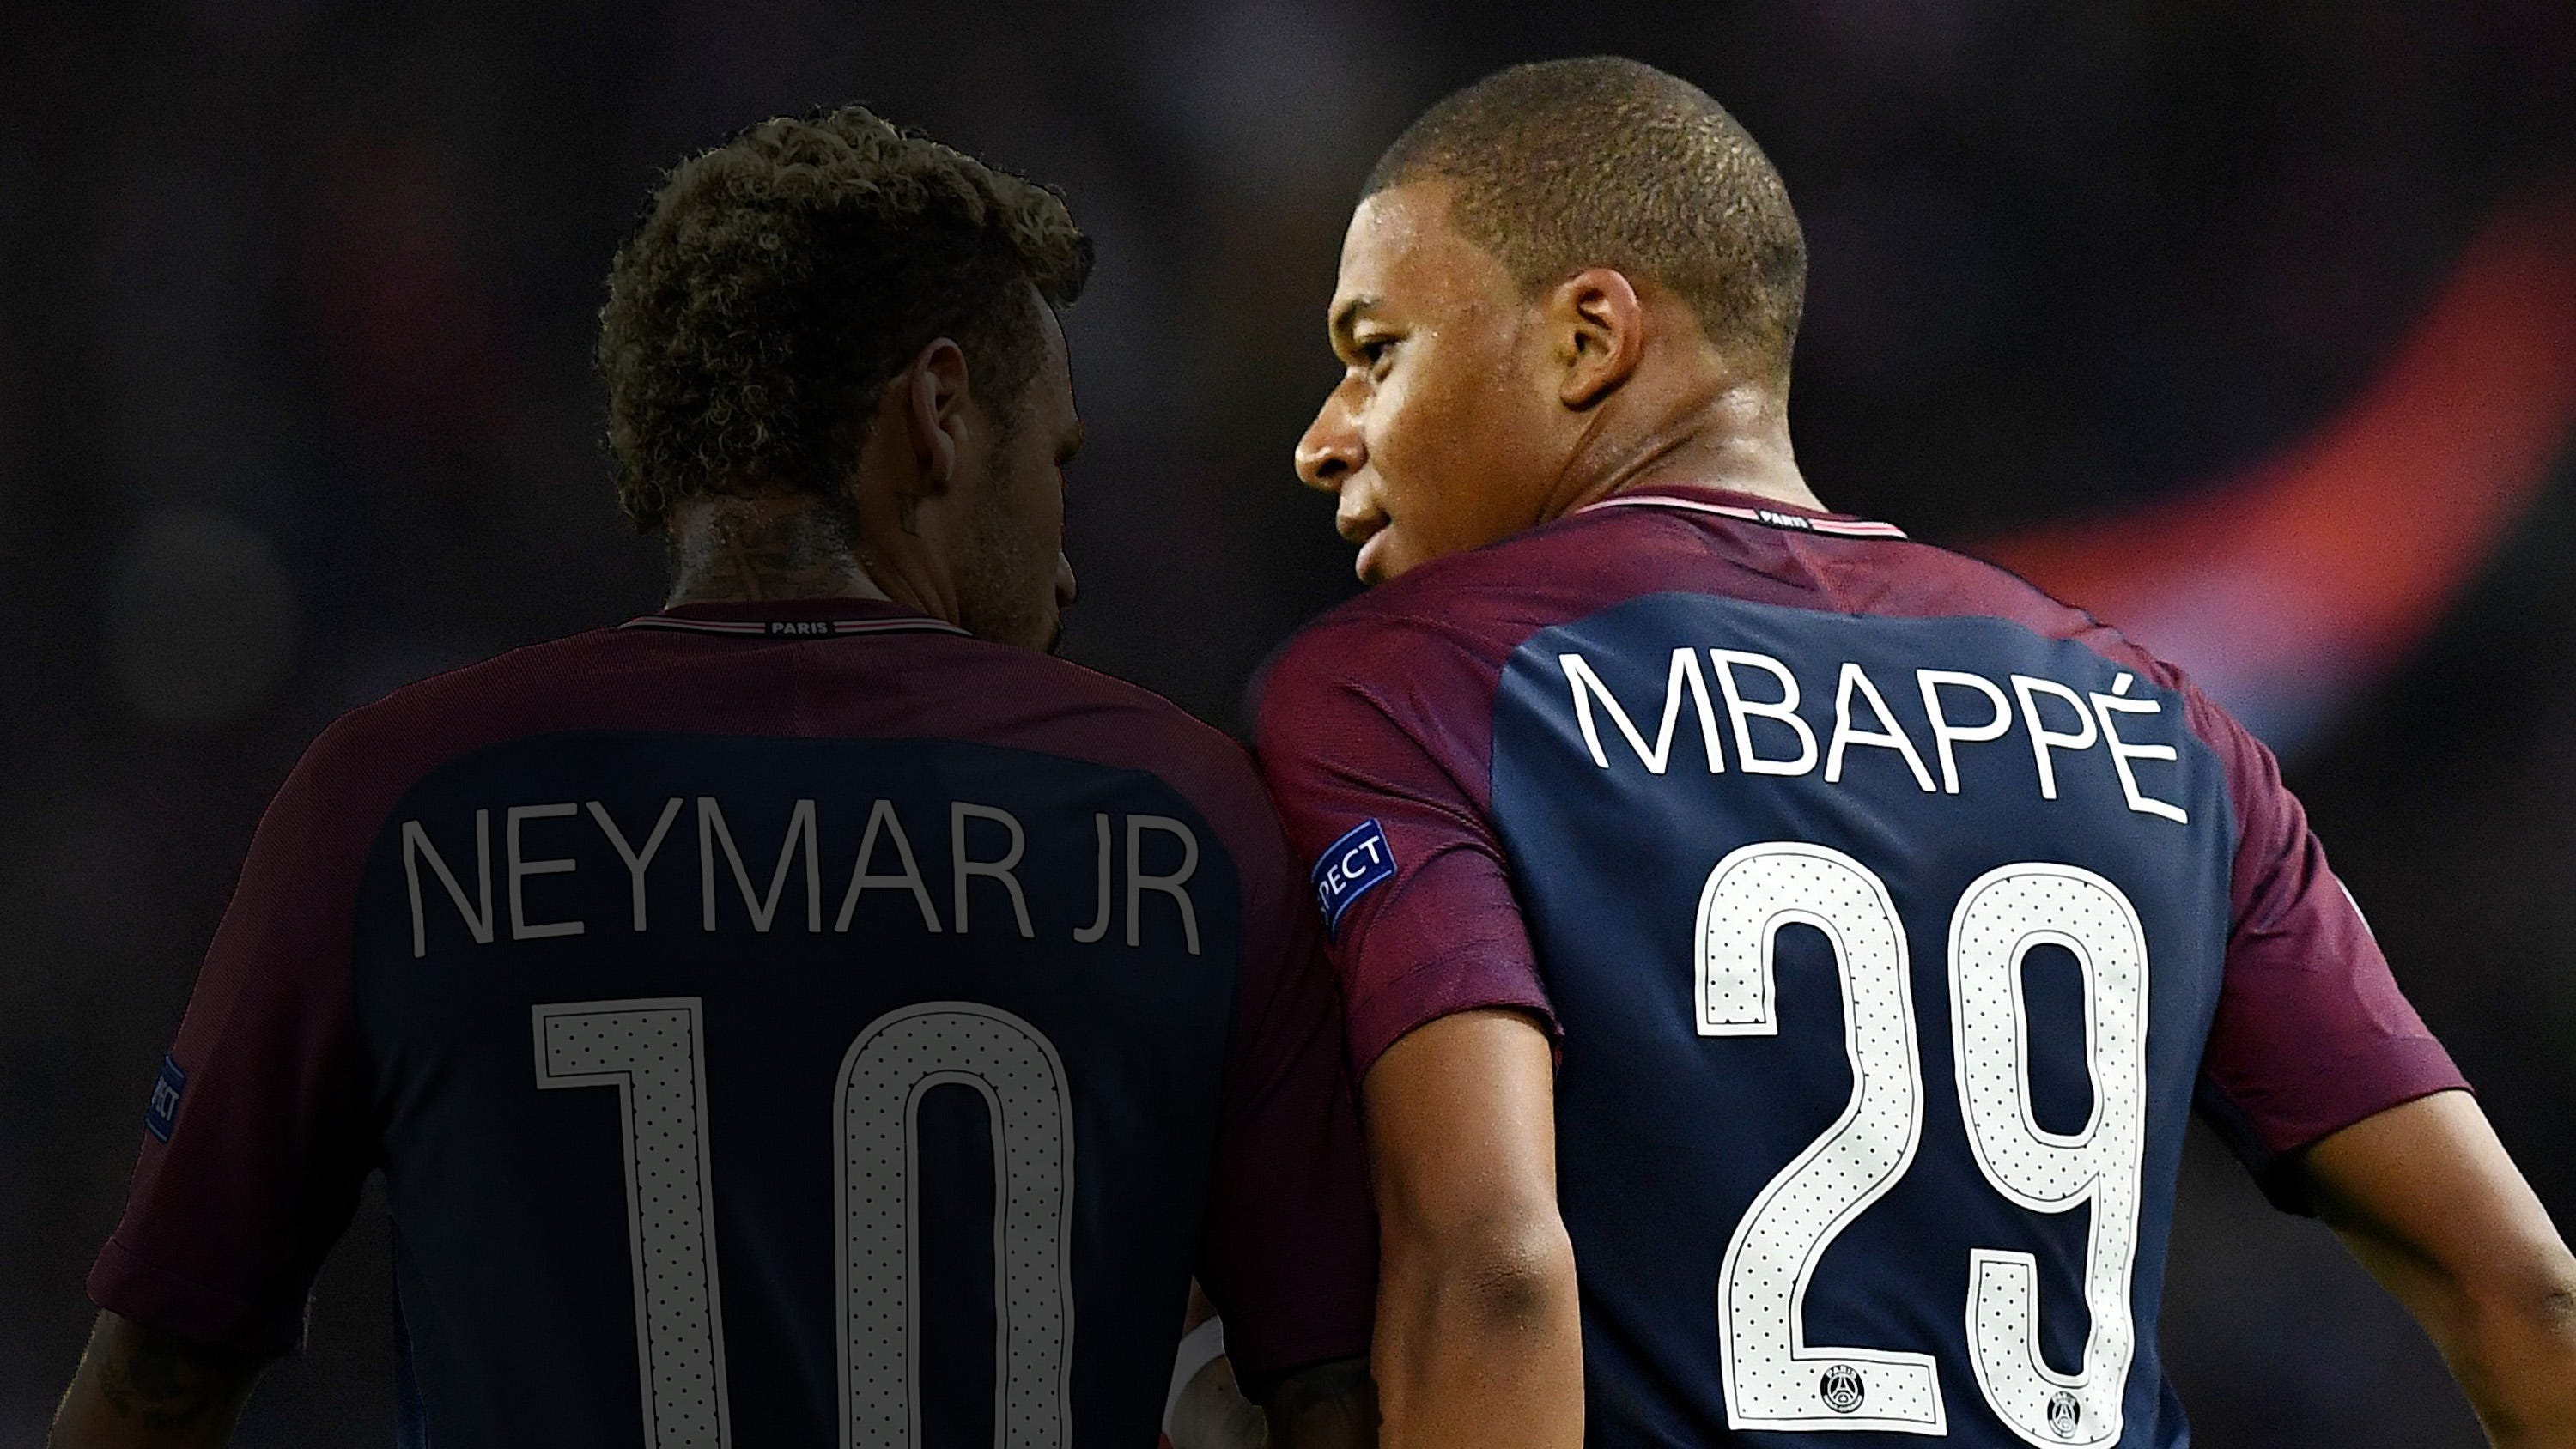 Neymar And Mbappe Wallpaper Download  MobCup